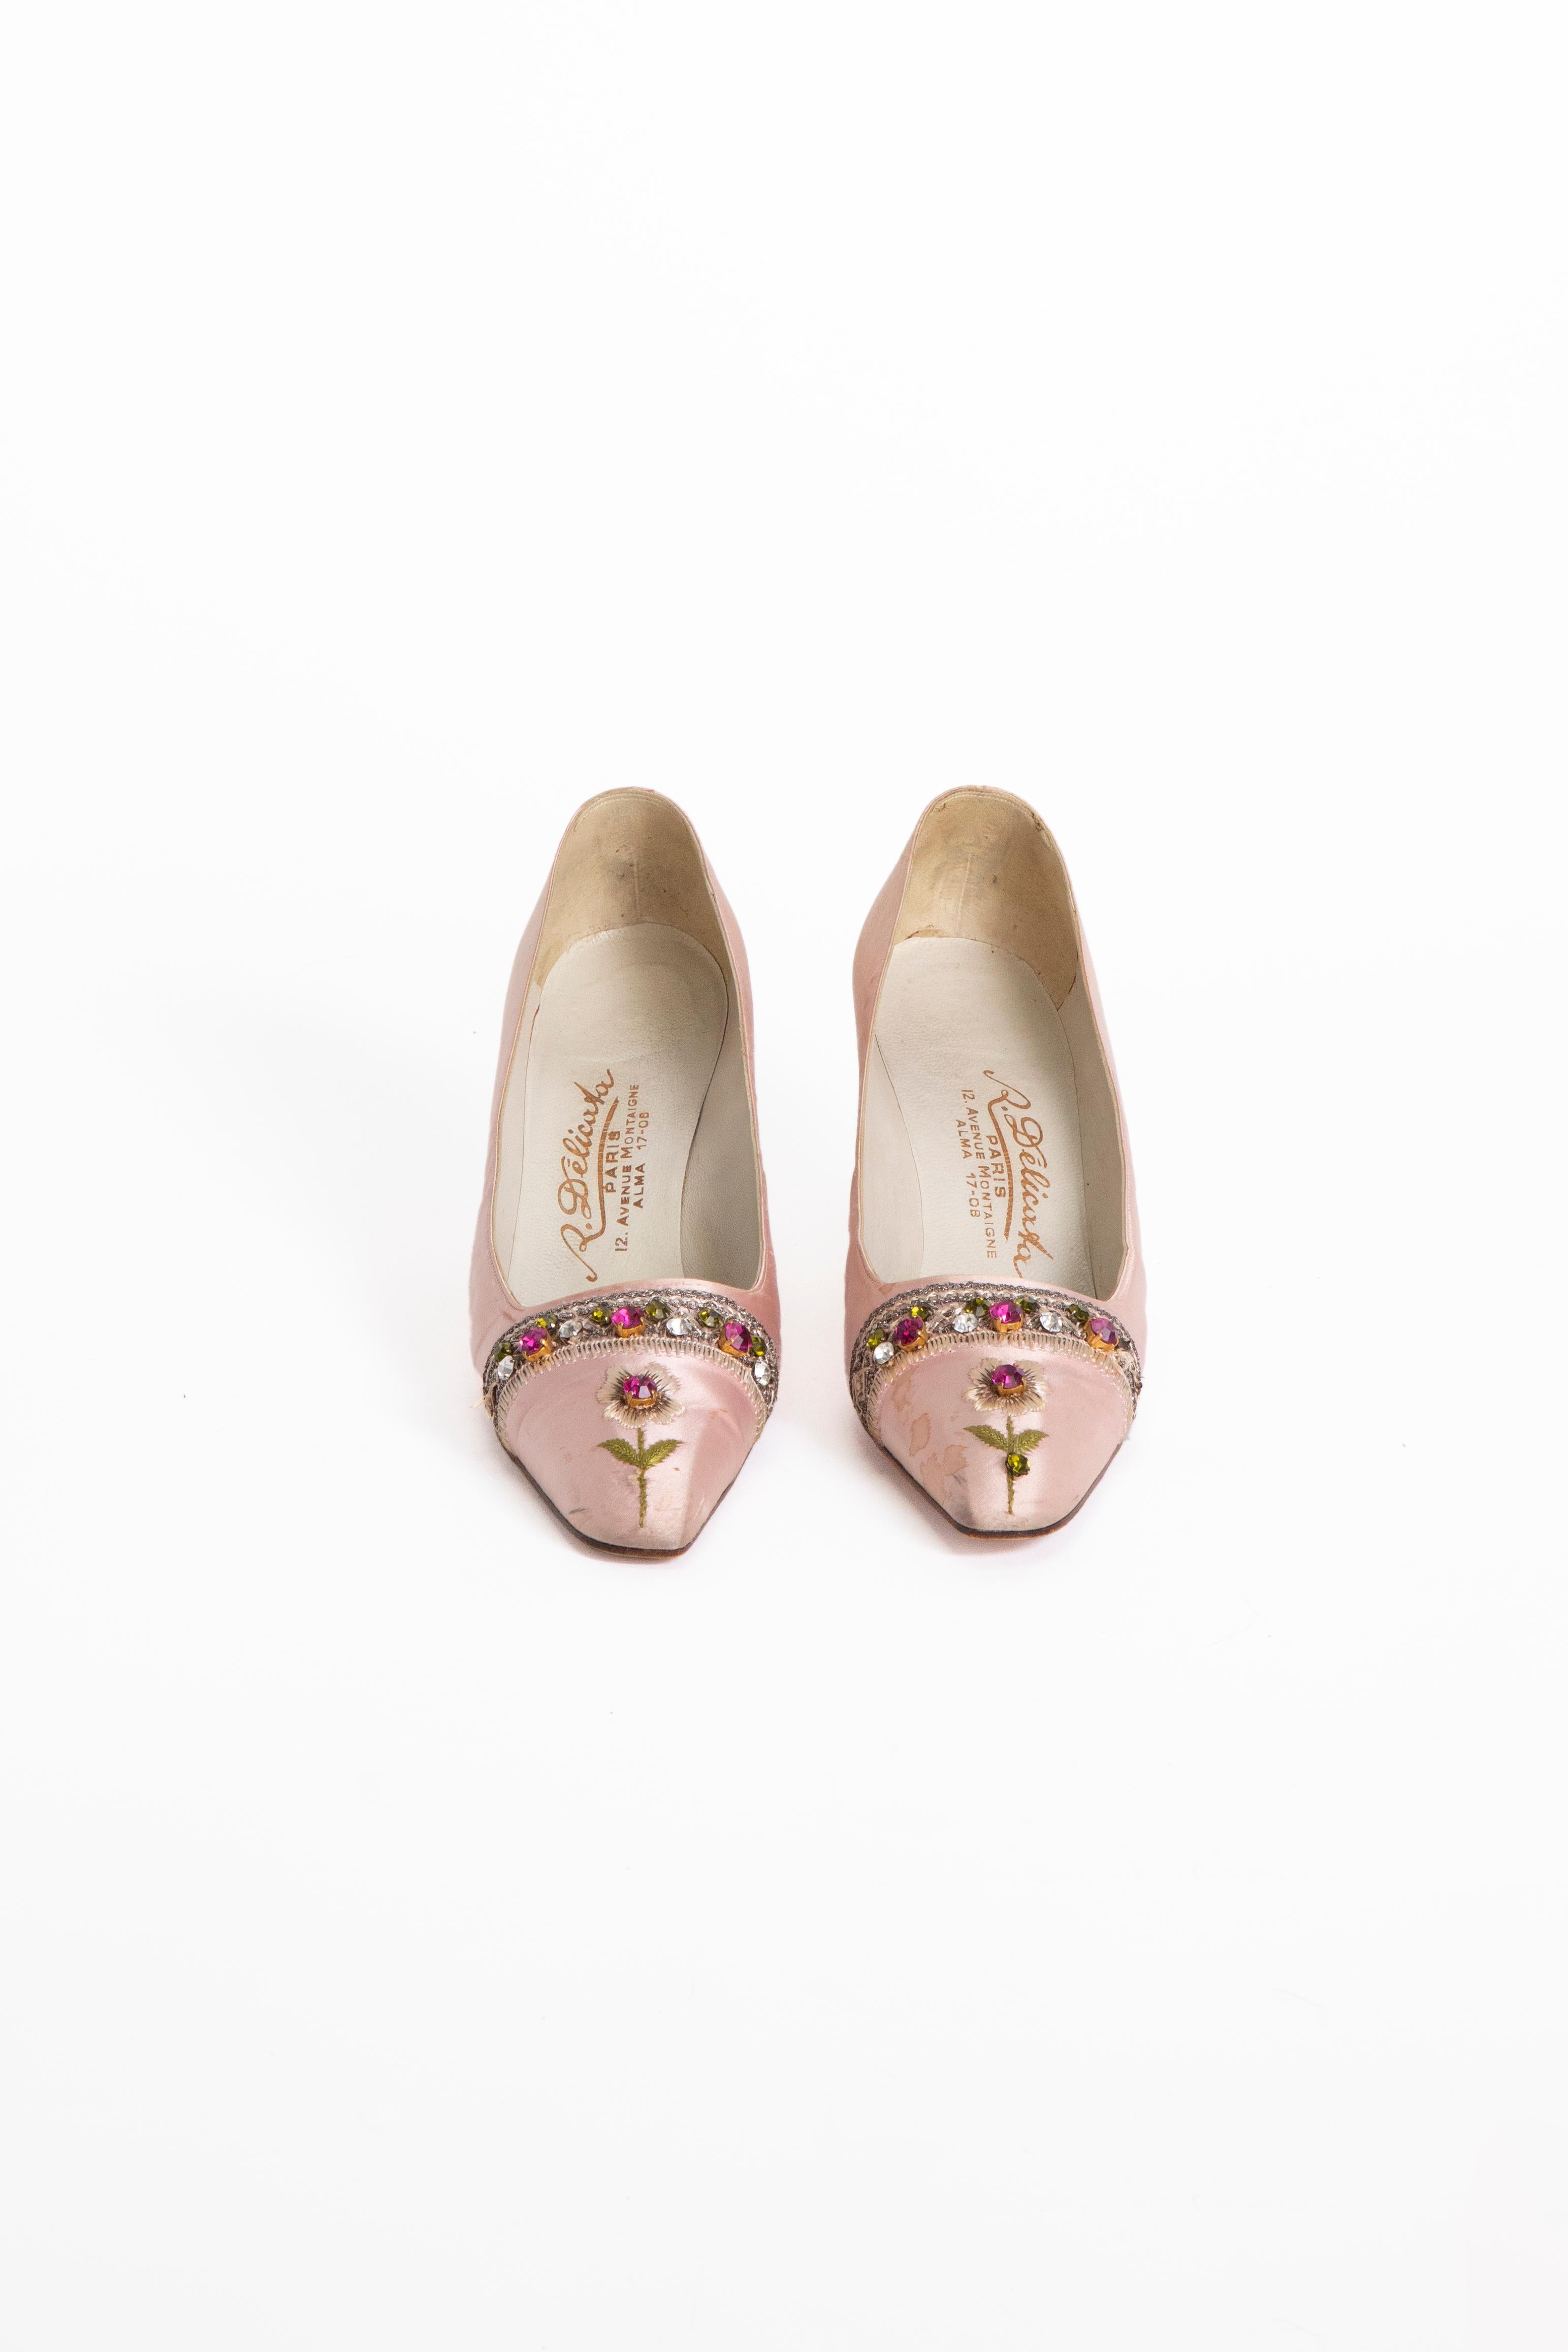 1950s  R.Delicata décolleté  in pink satin encrusted with stones and embroidery.
Custom made

MEASURES:
Size USA: 8
Size IT: 38 1/2
Heels: 7 CM